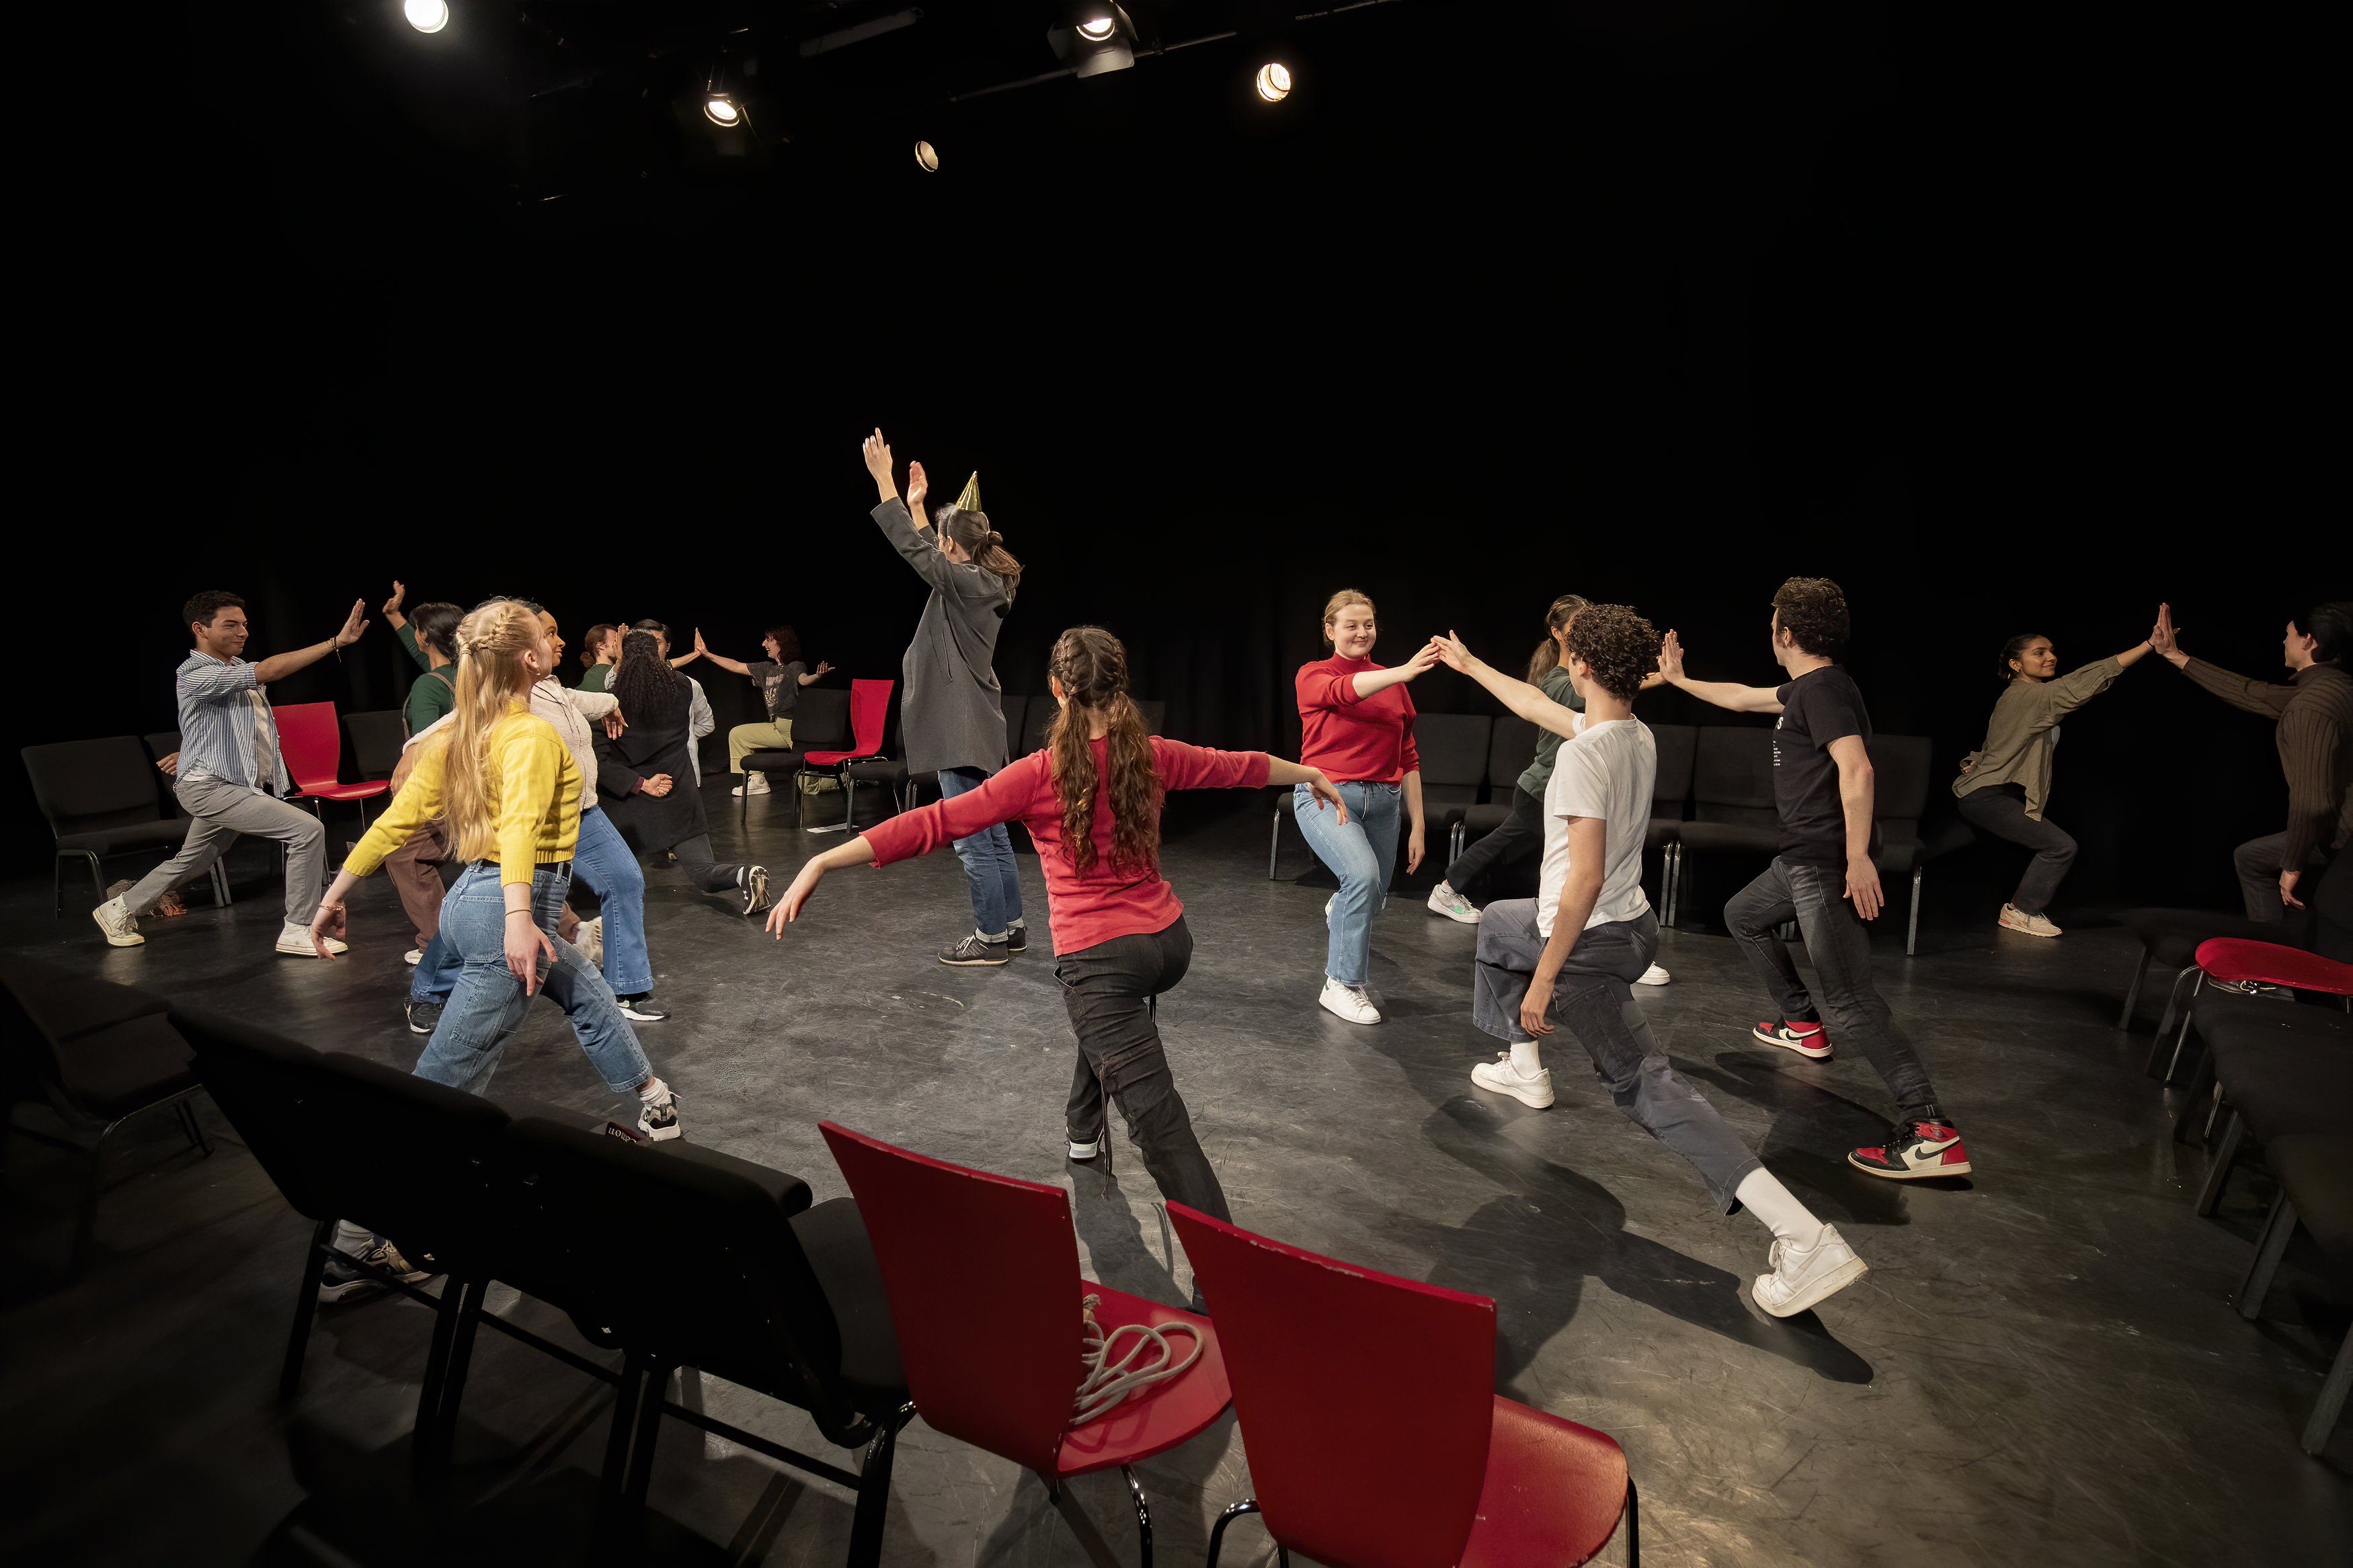 Students in mid-performance and arms outstretched in a black box theatre